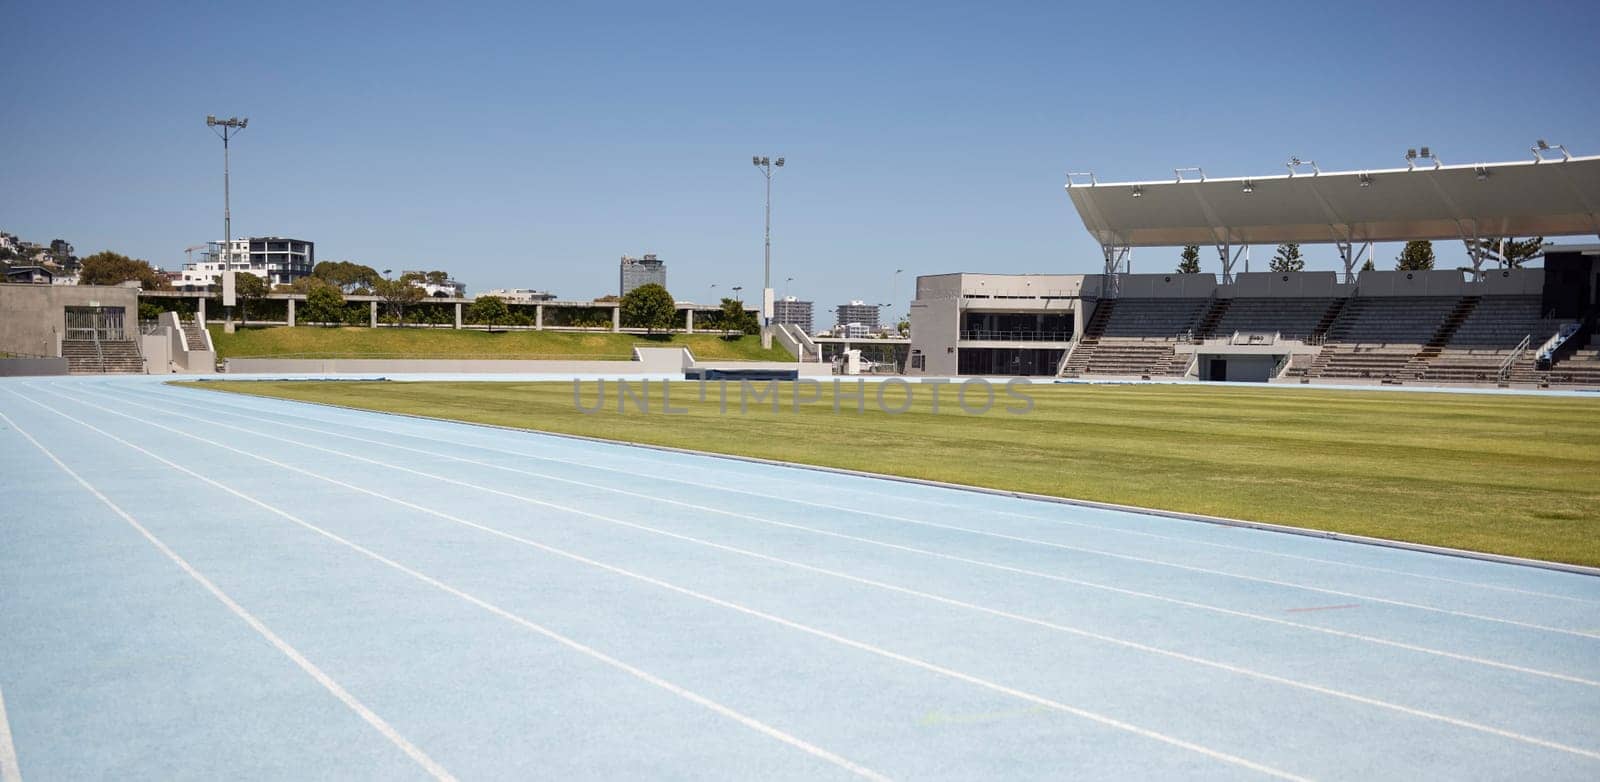 Race track, athletic and empty outdoor sports stadium for marathon, competition or olympics. Sport, no people and field at outside arena for training, exercise or workout for professional athletes